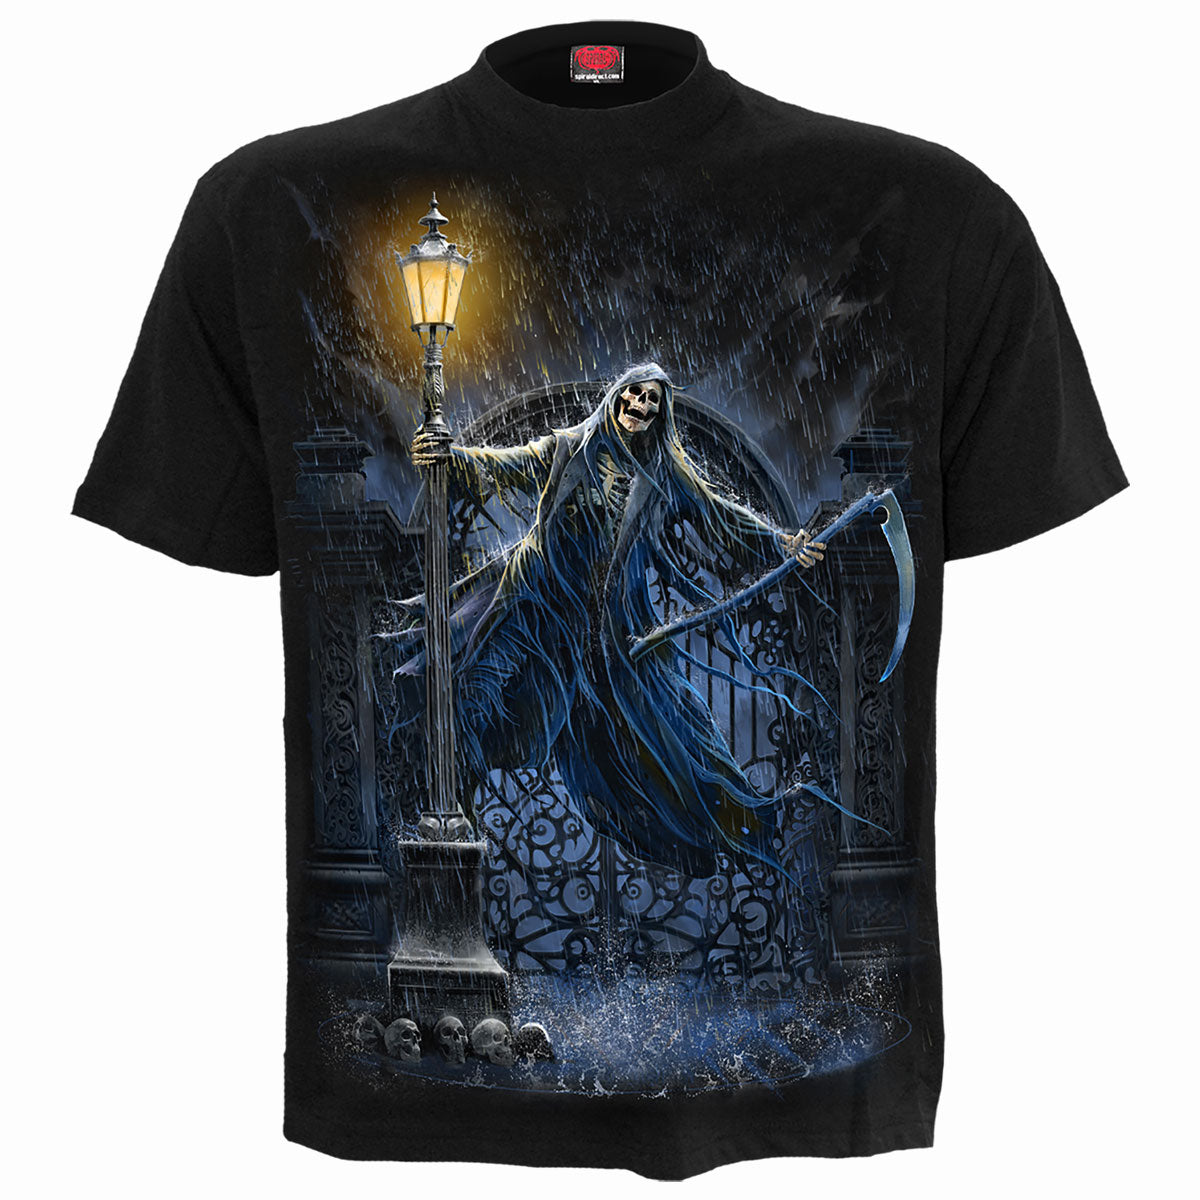 REAPING IN THE RAIN - T-Shirt Black